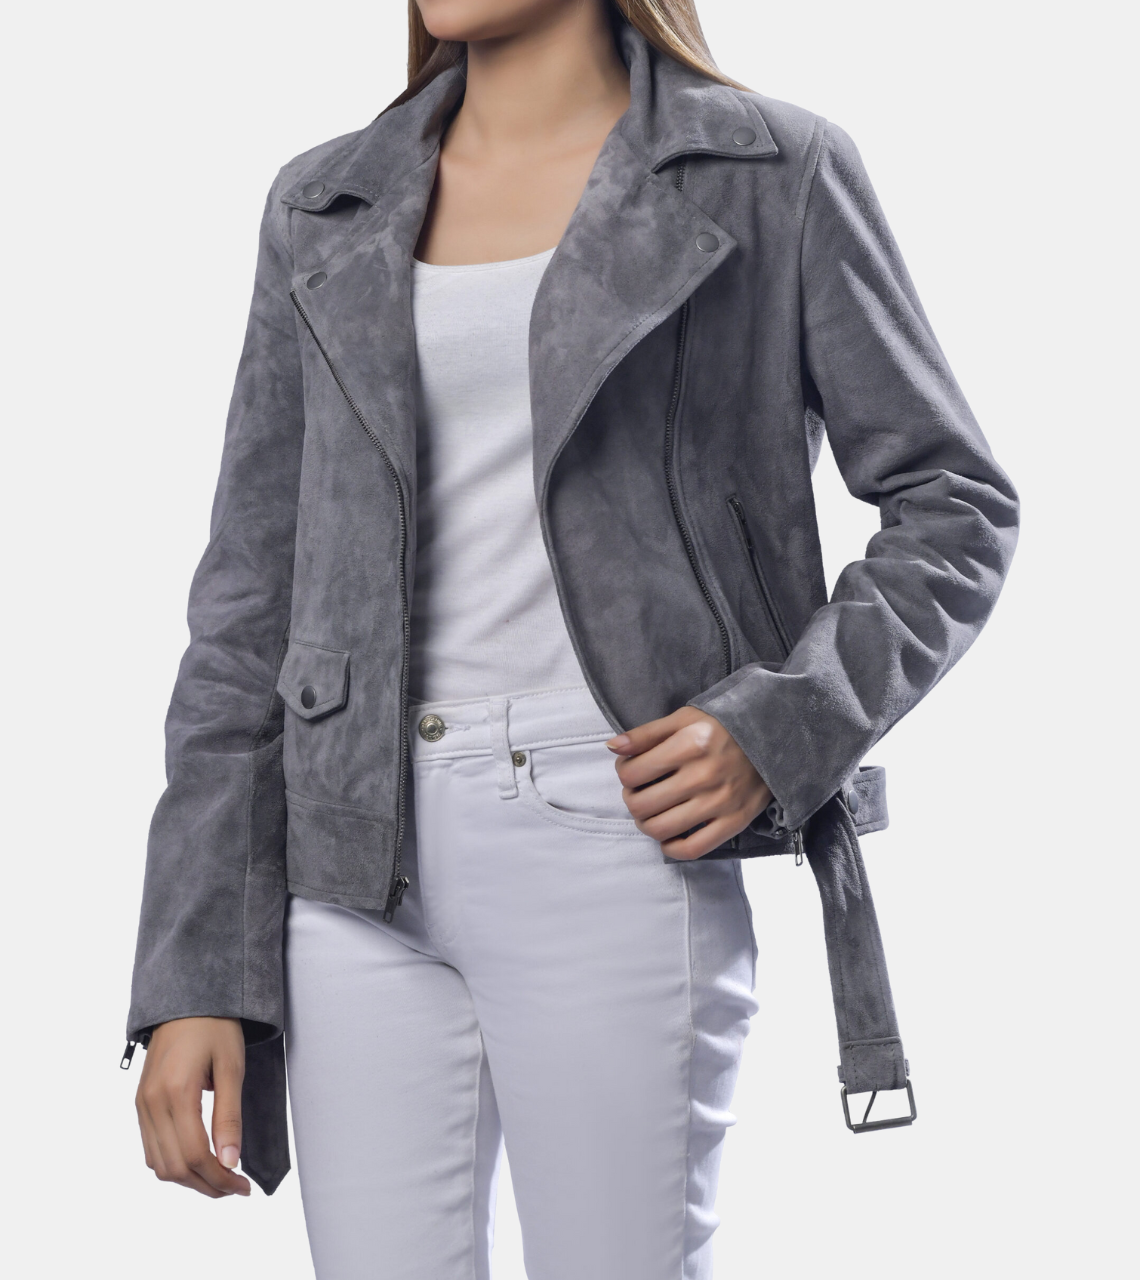 Redford Women's Grey Suede Leather Jacket